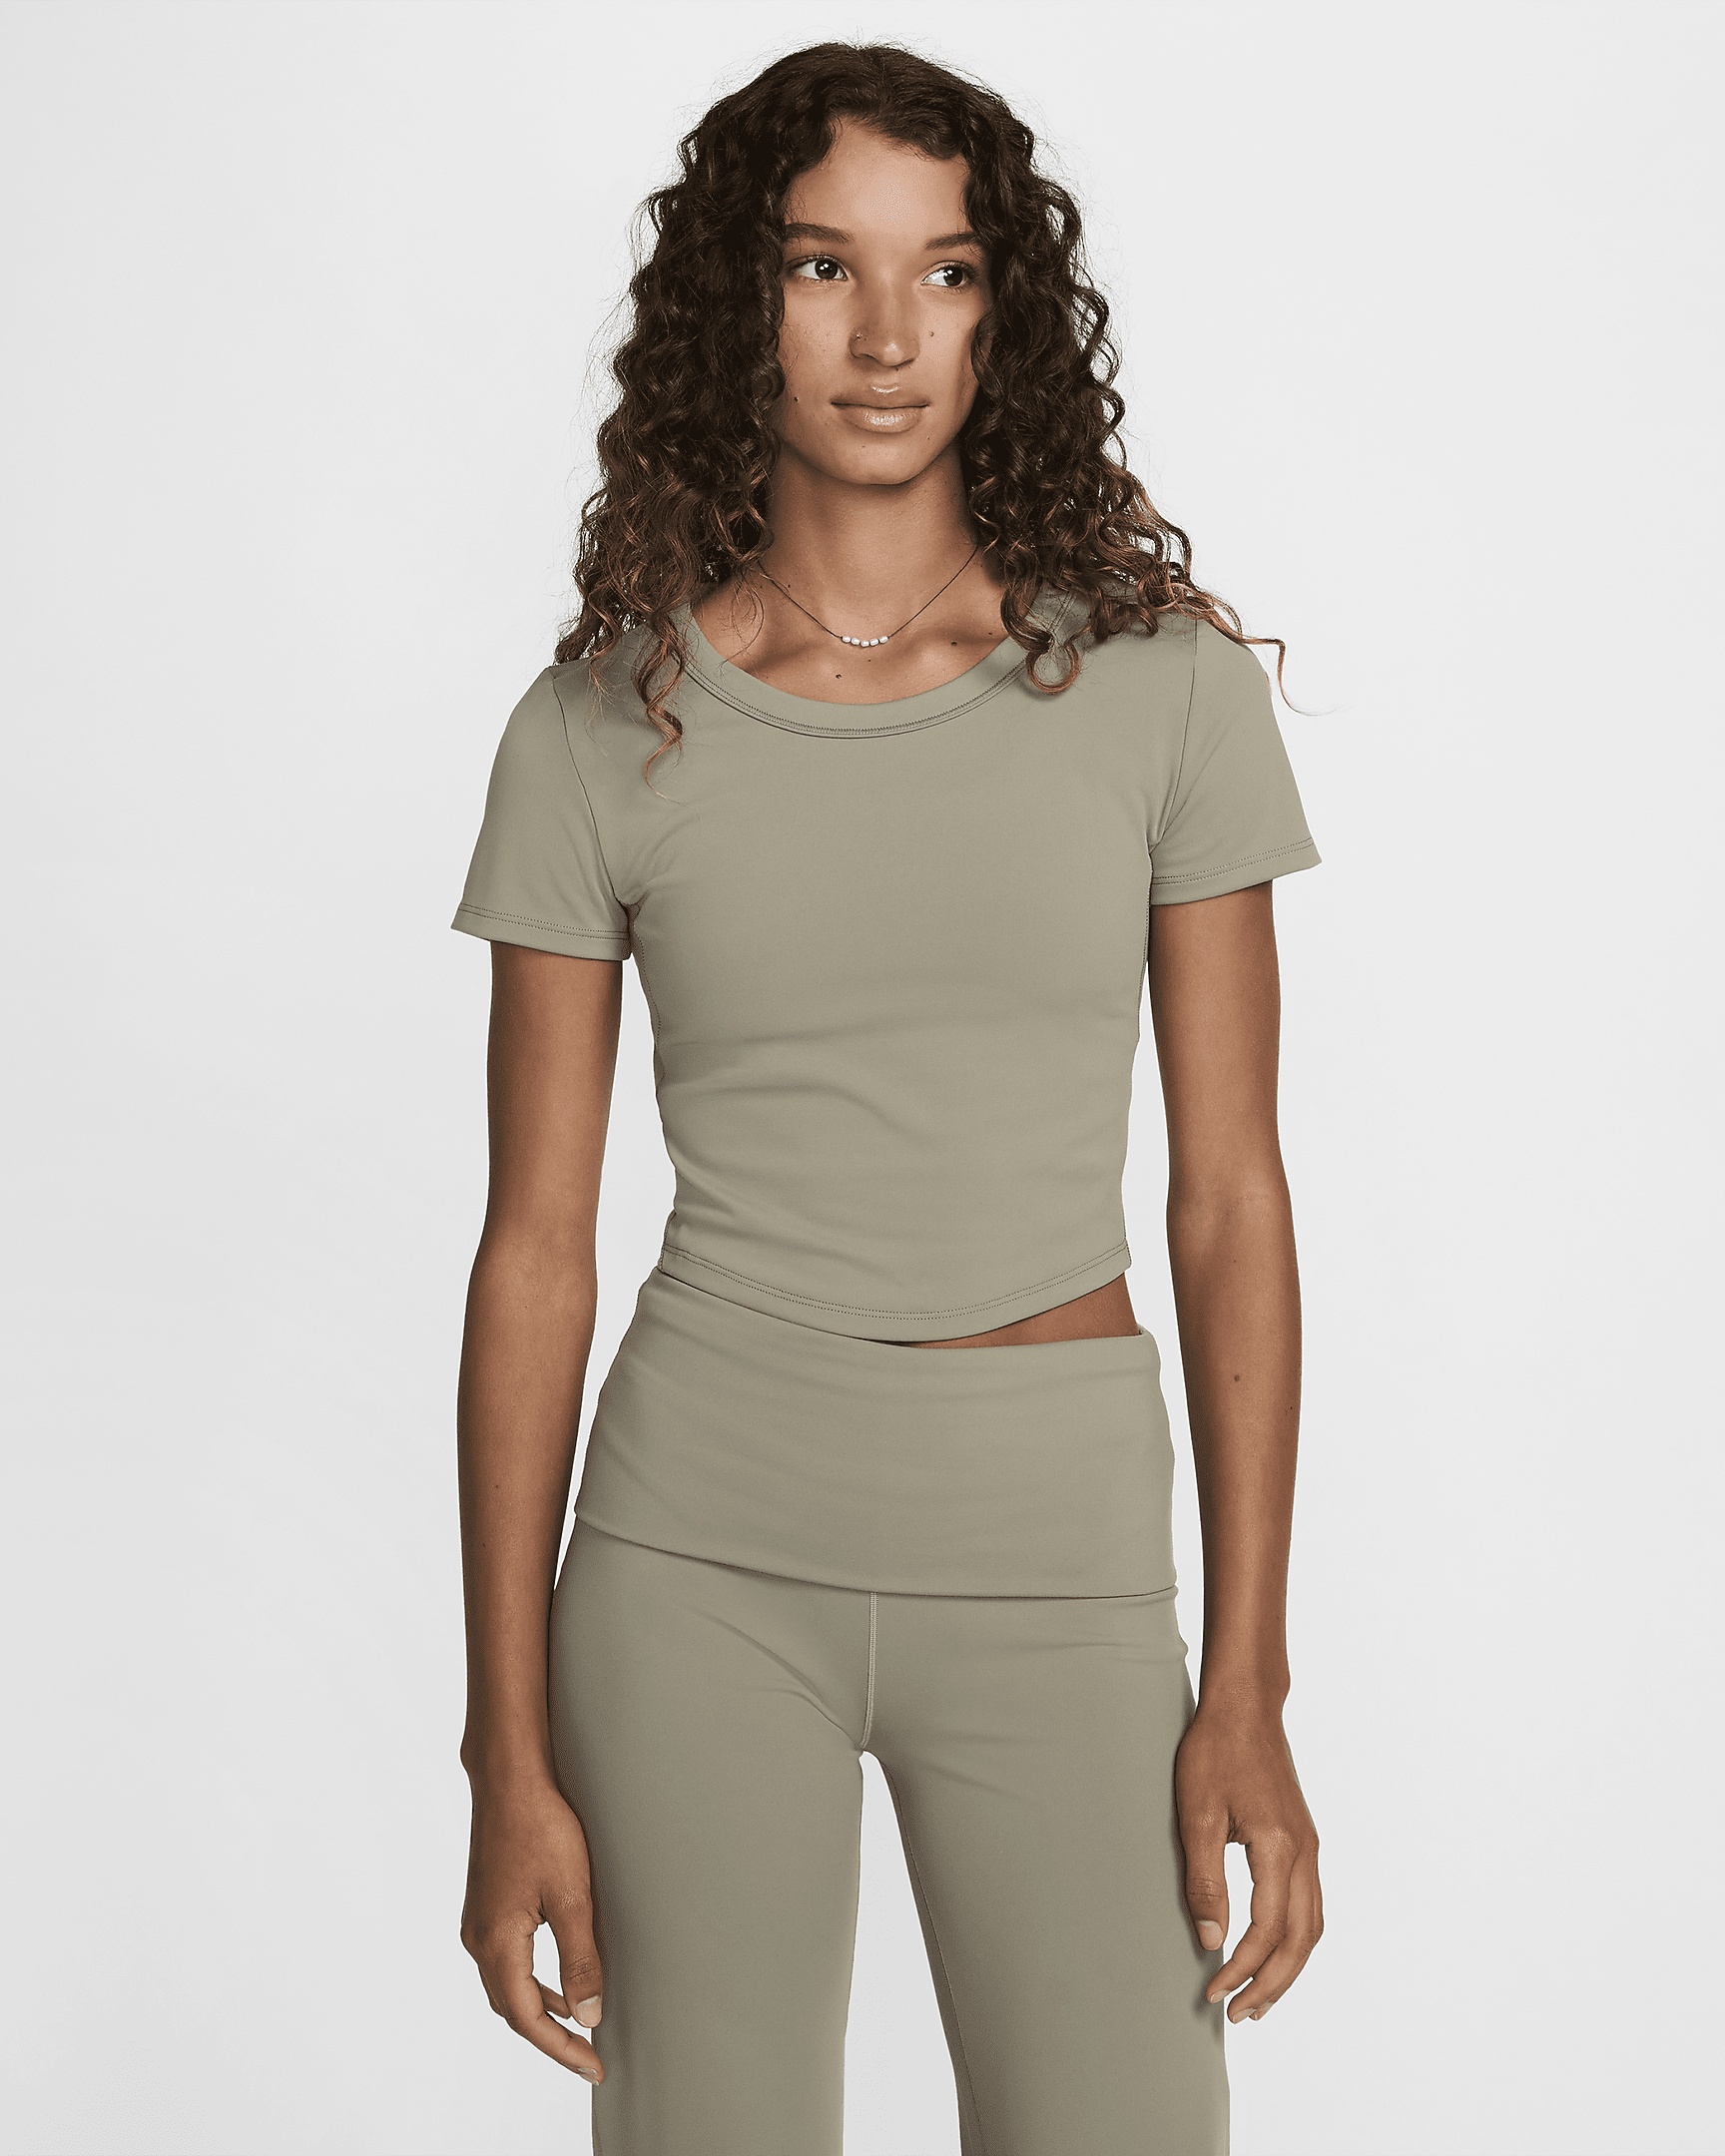 Nike One Fitted Women's Dri-FIT Short-Sleeve Cropped Top - 1